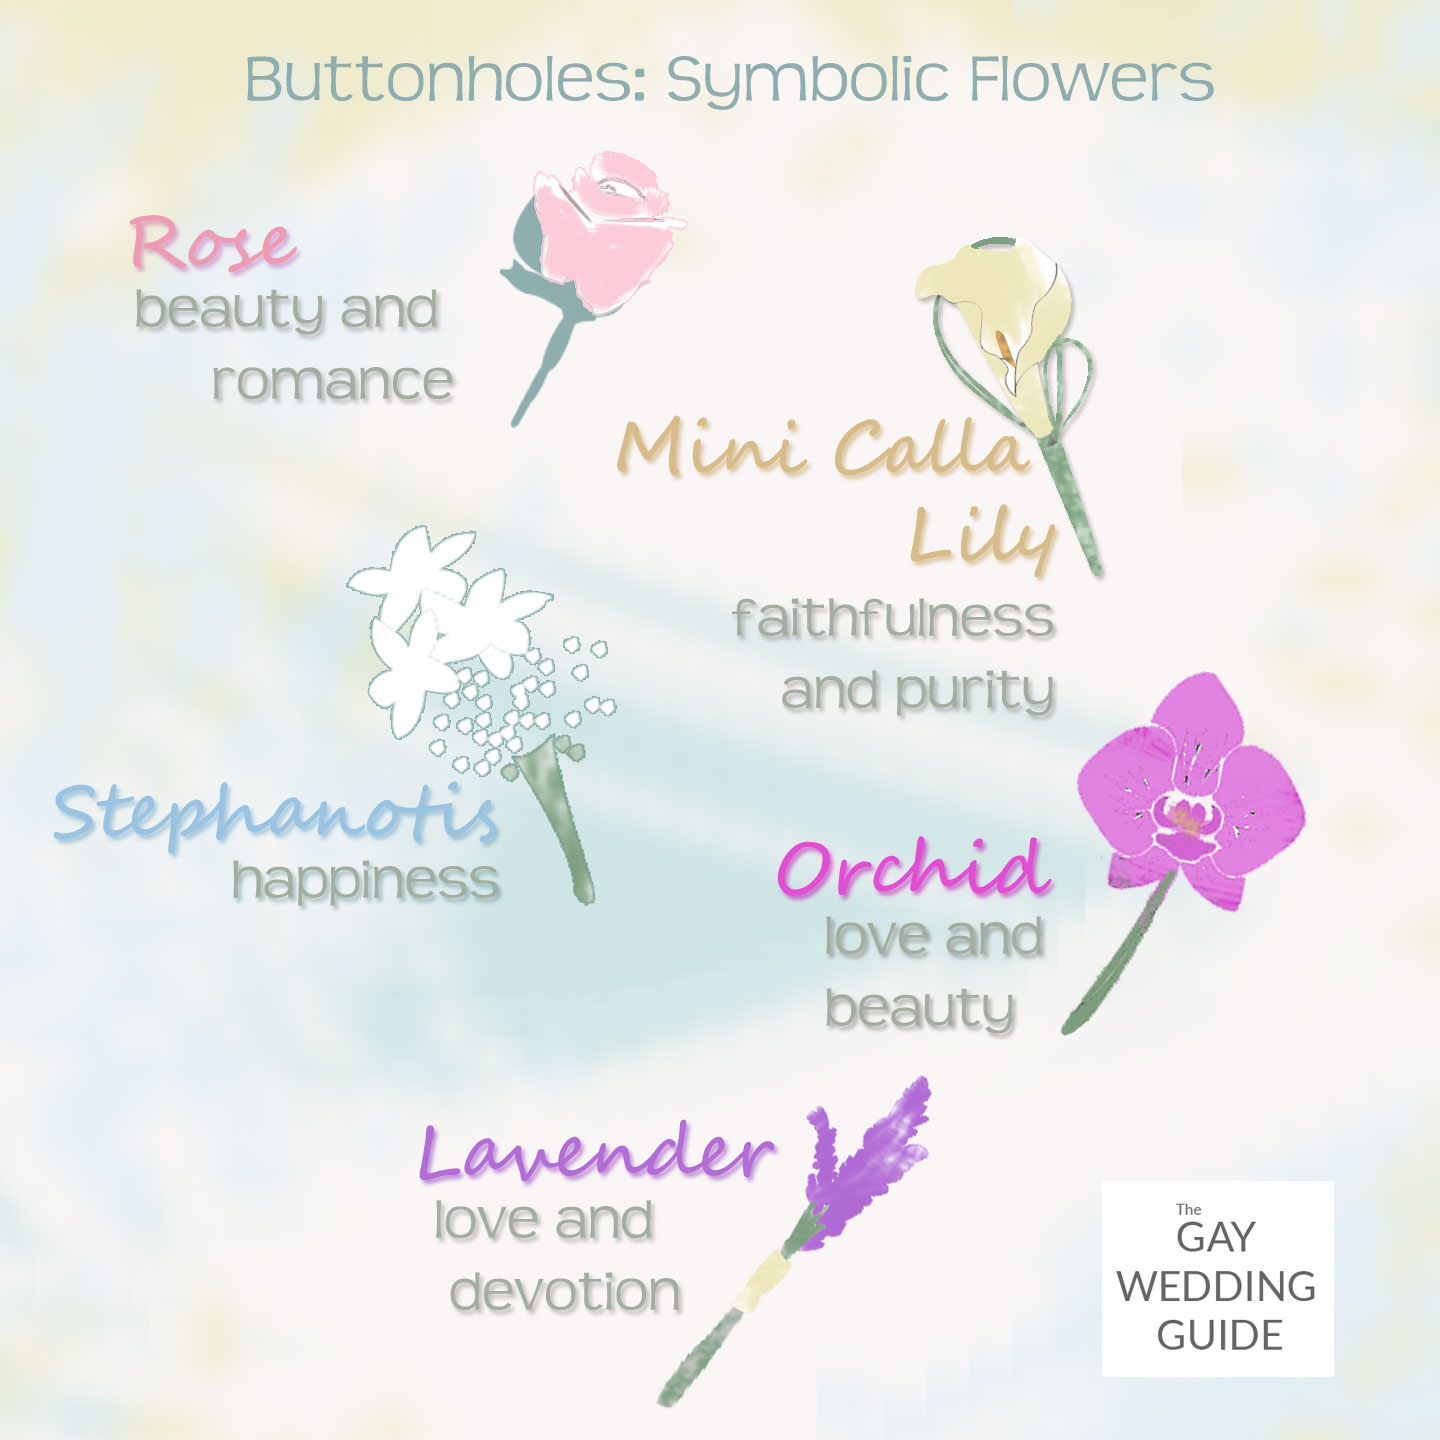 buttonholes-infographic-meaning-of-flowers-including-lily-meaning-via-the-gay-wedding-guide